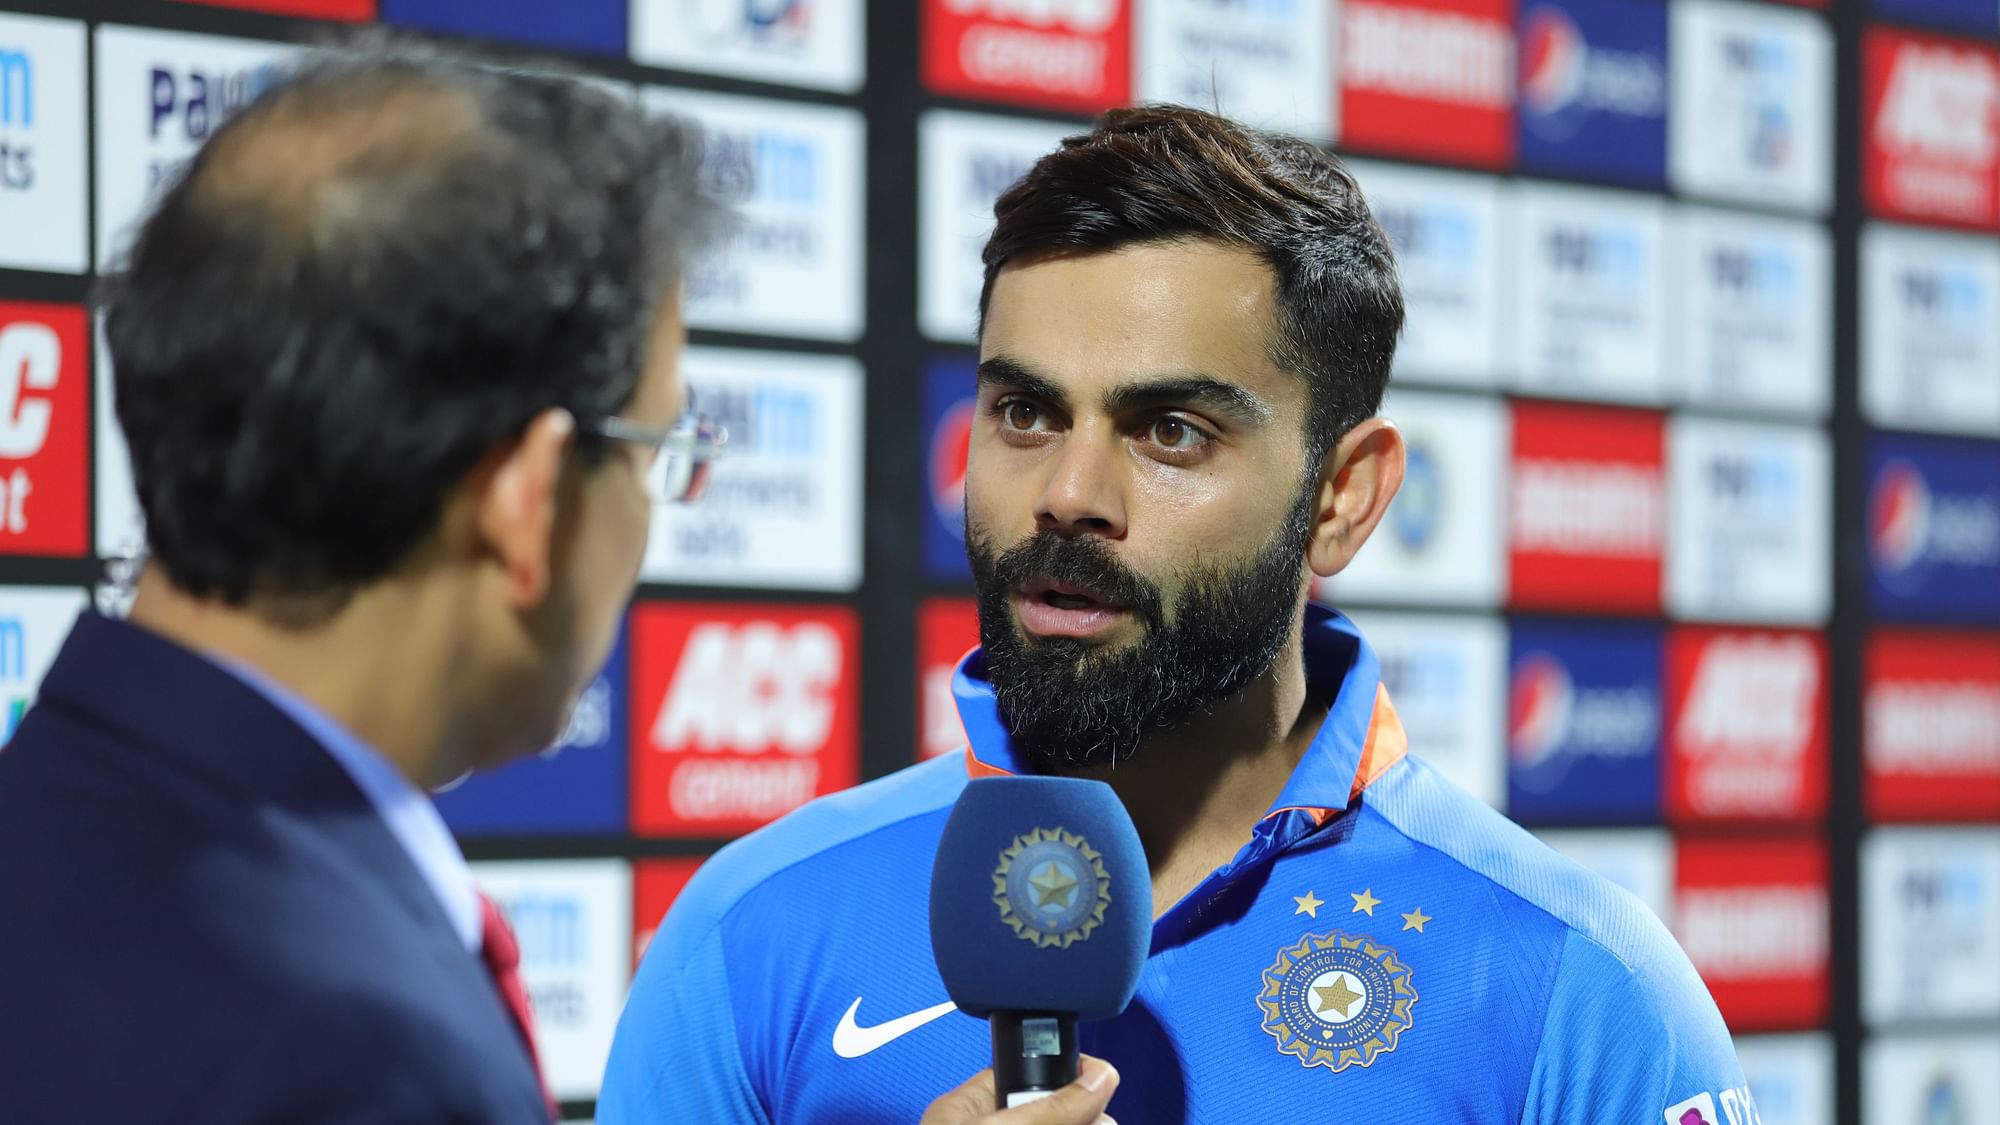 India captain Virat Kohli expressed his strong displeasure at the manner in which Ravindra Jadeja was given run out following a late DRS call.